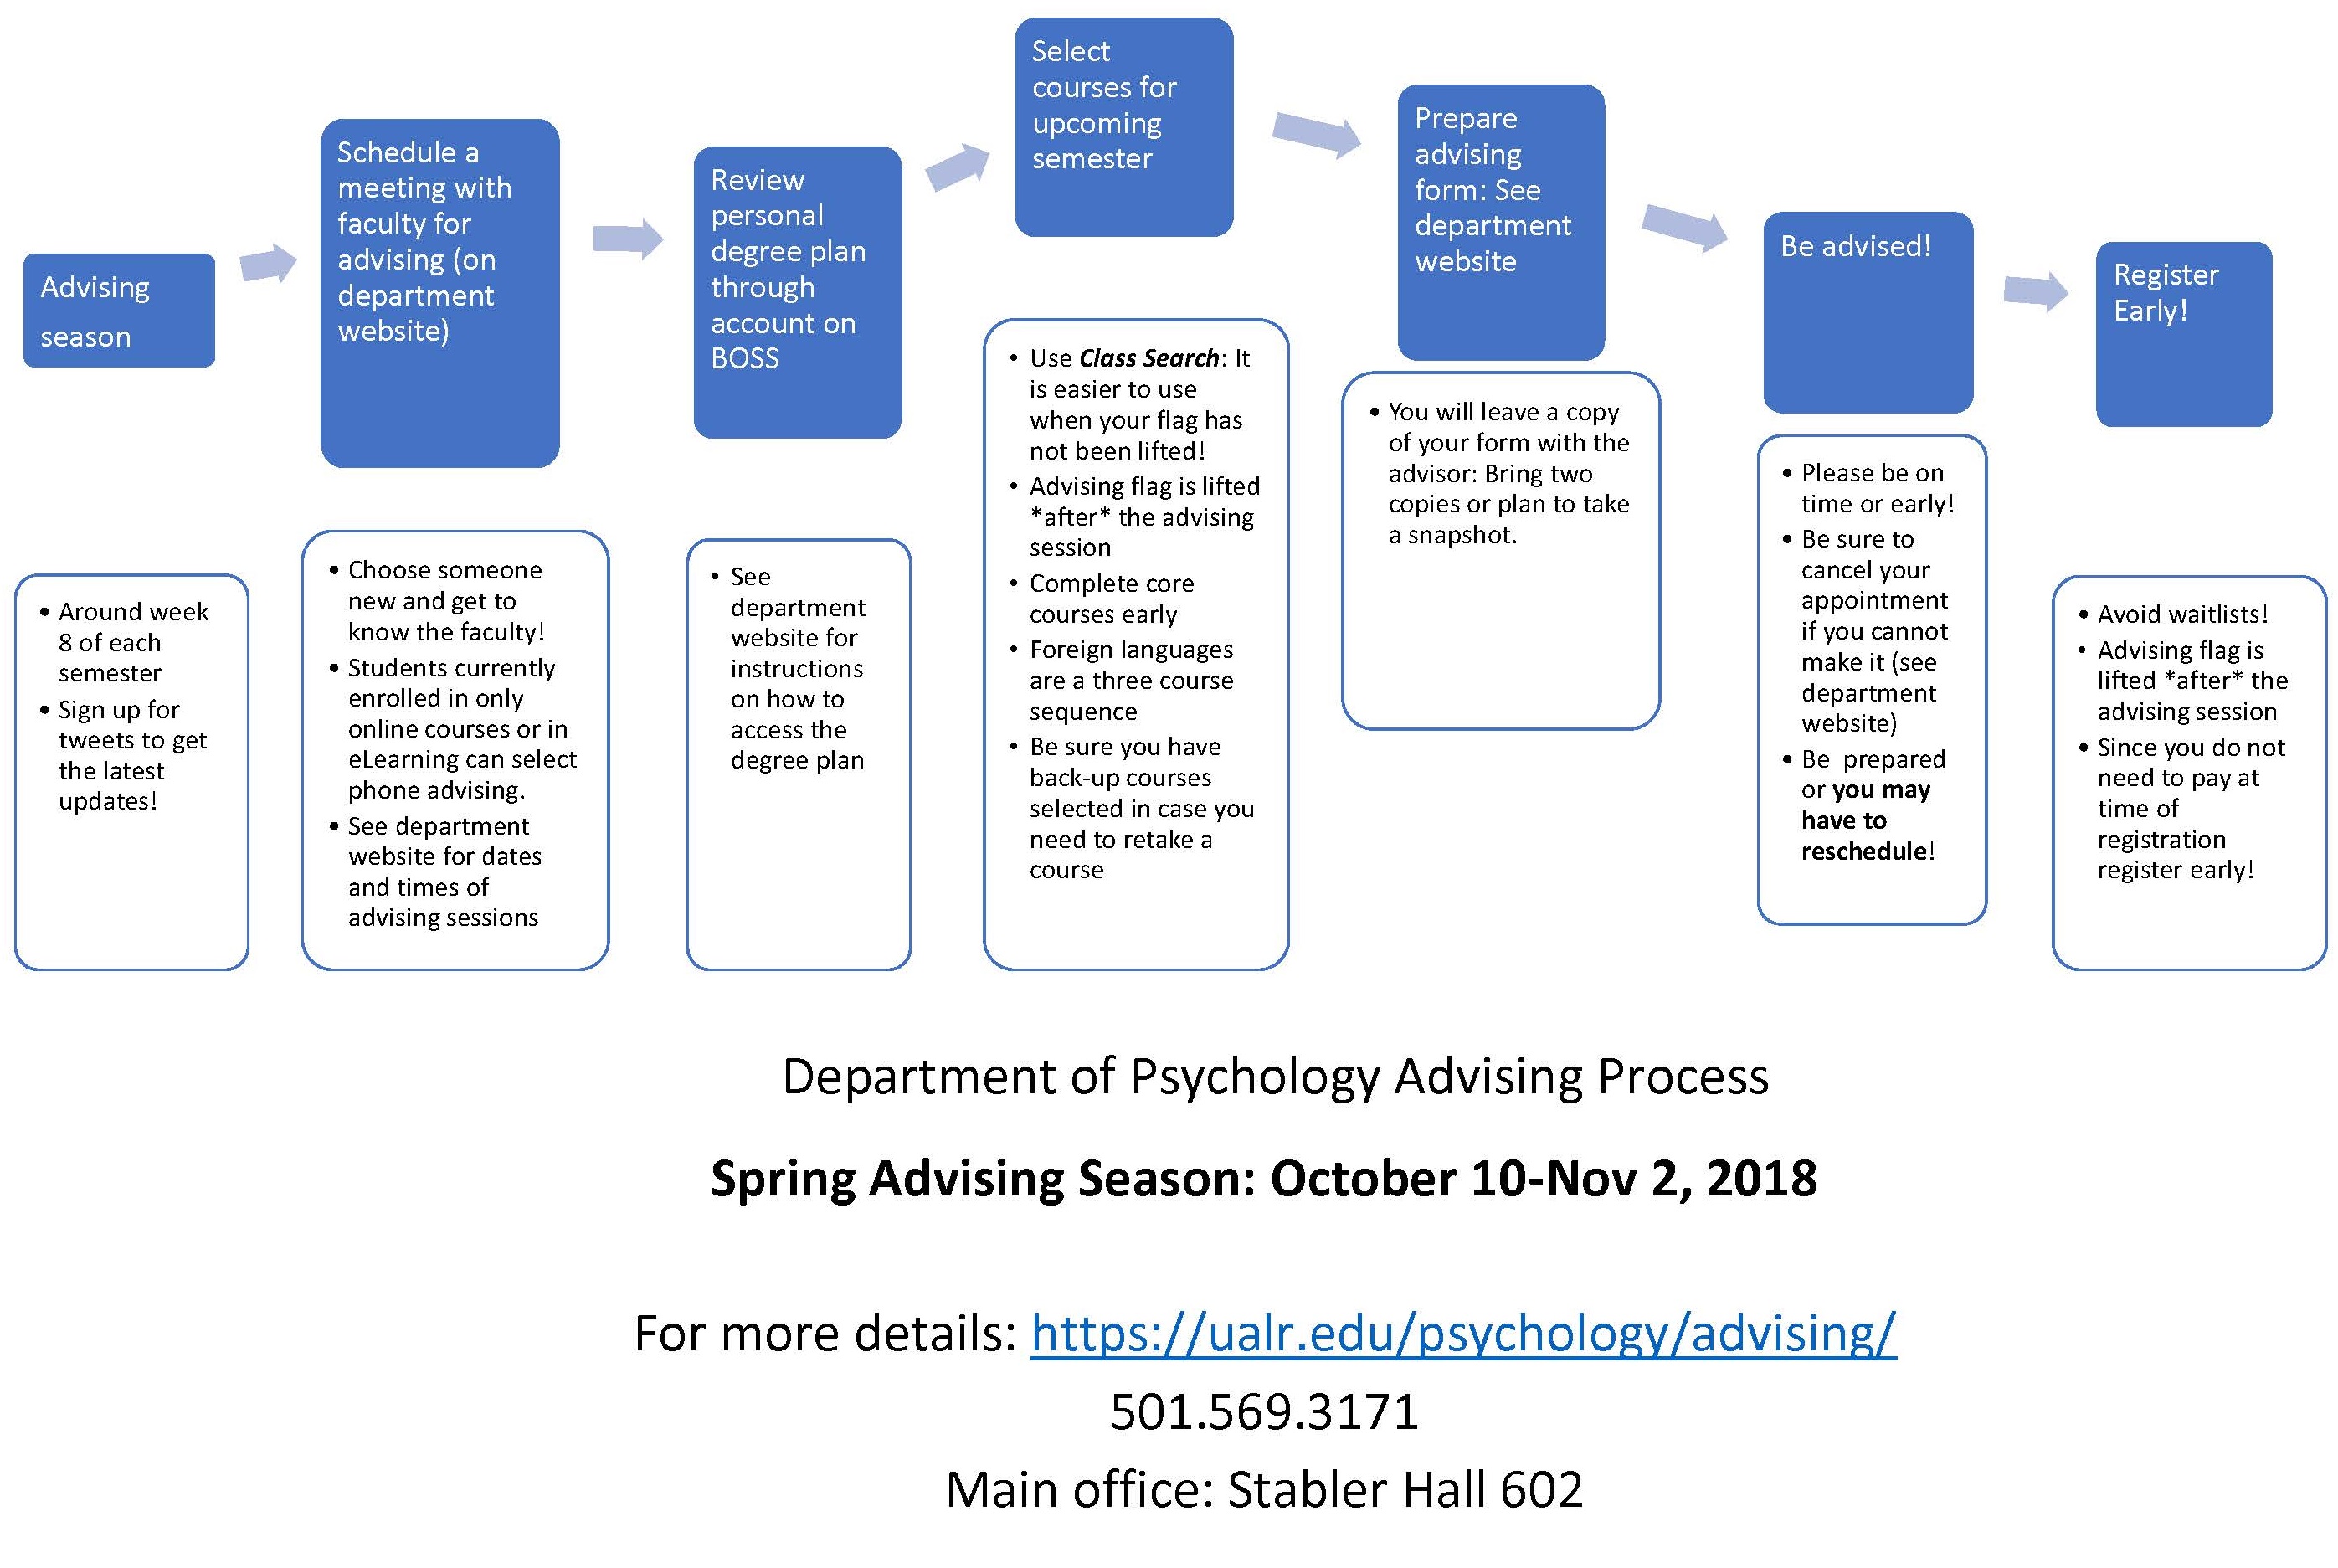 October 10 - November 2 is the Department’s official advising period. 